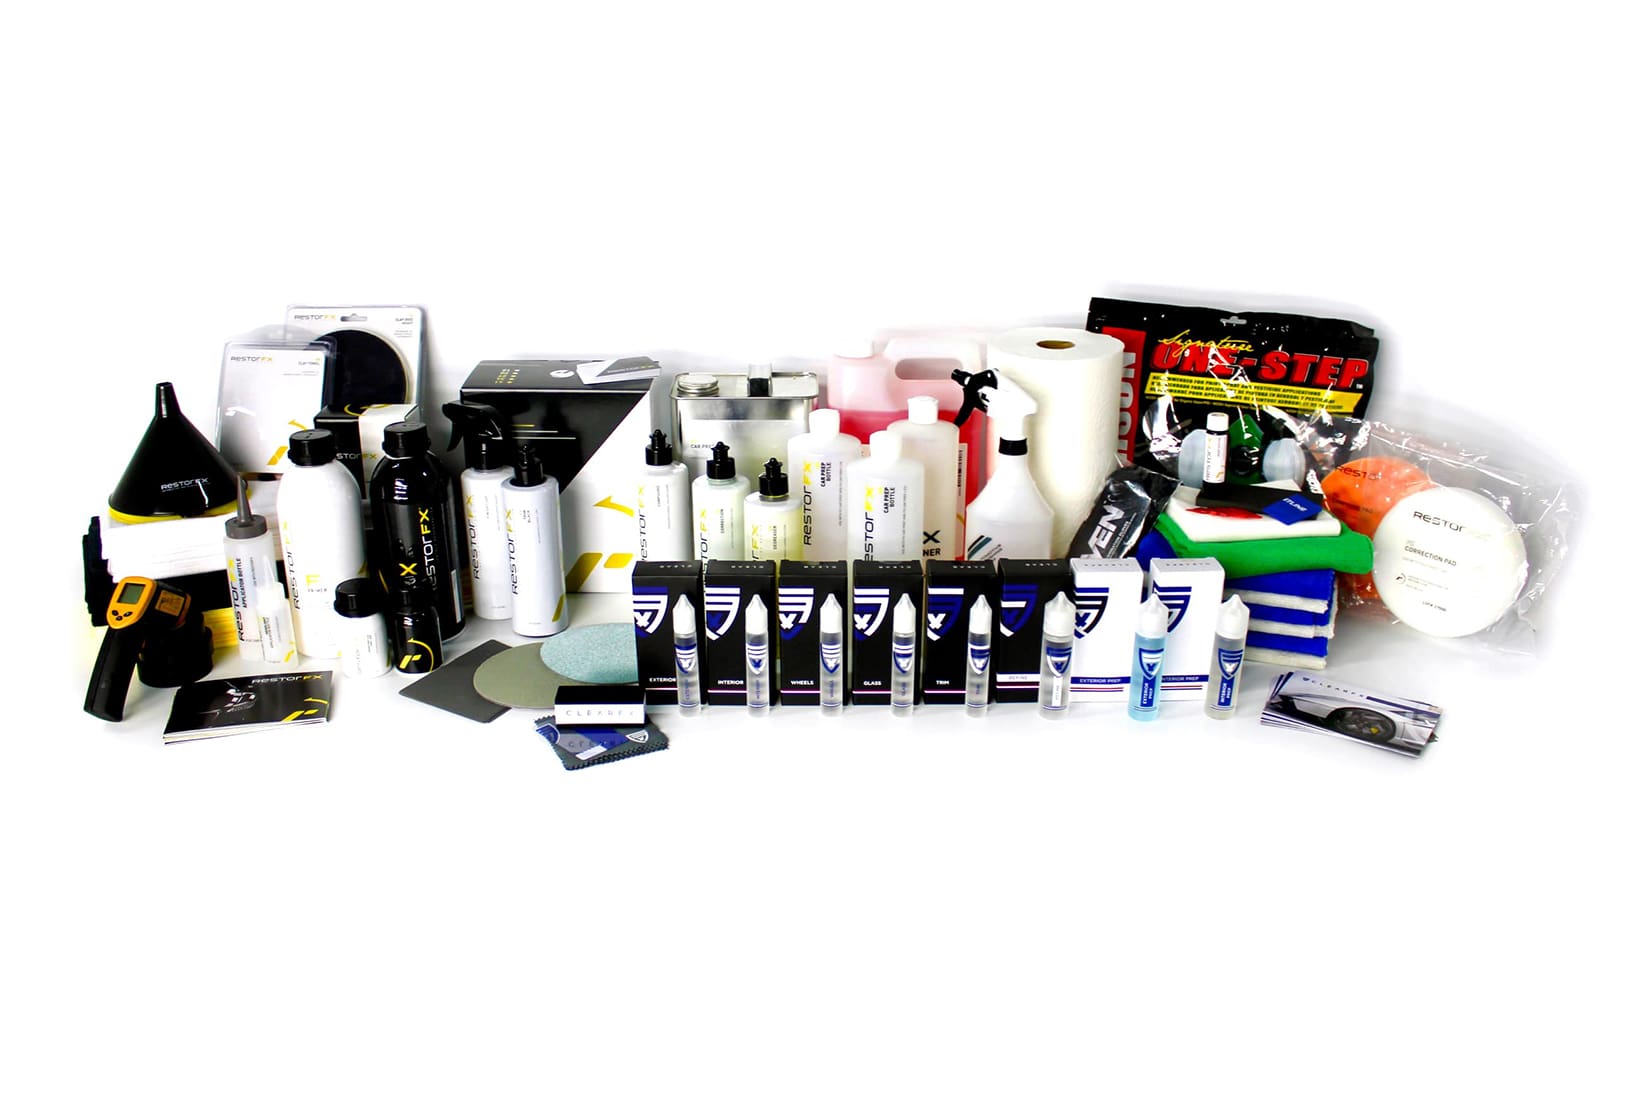 Family of FX Preparation products in bottles, cans, boxes and pads, sprayers, cloths, others to prepare for car restoration